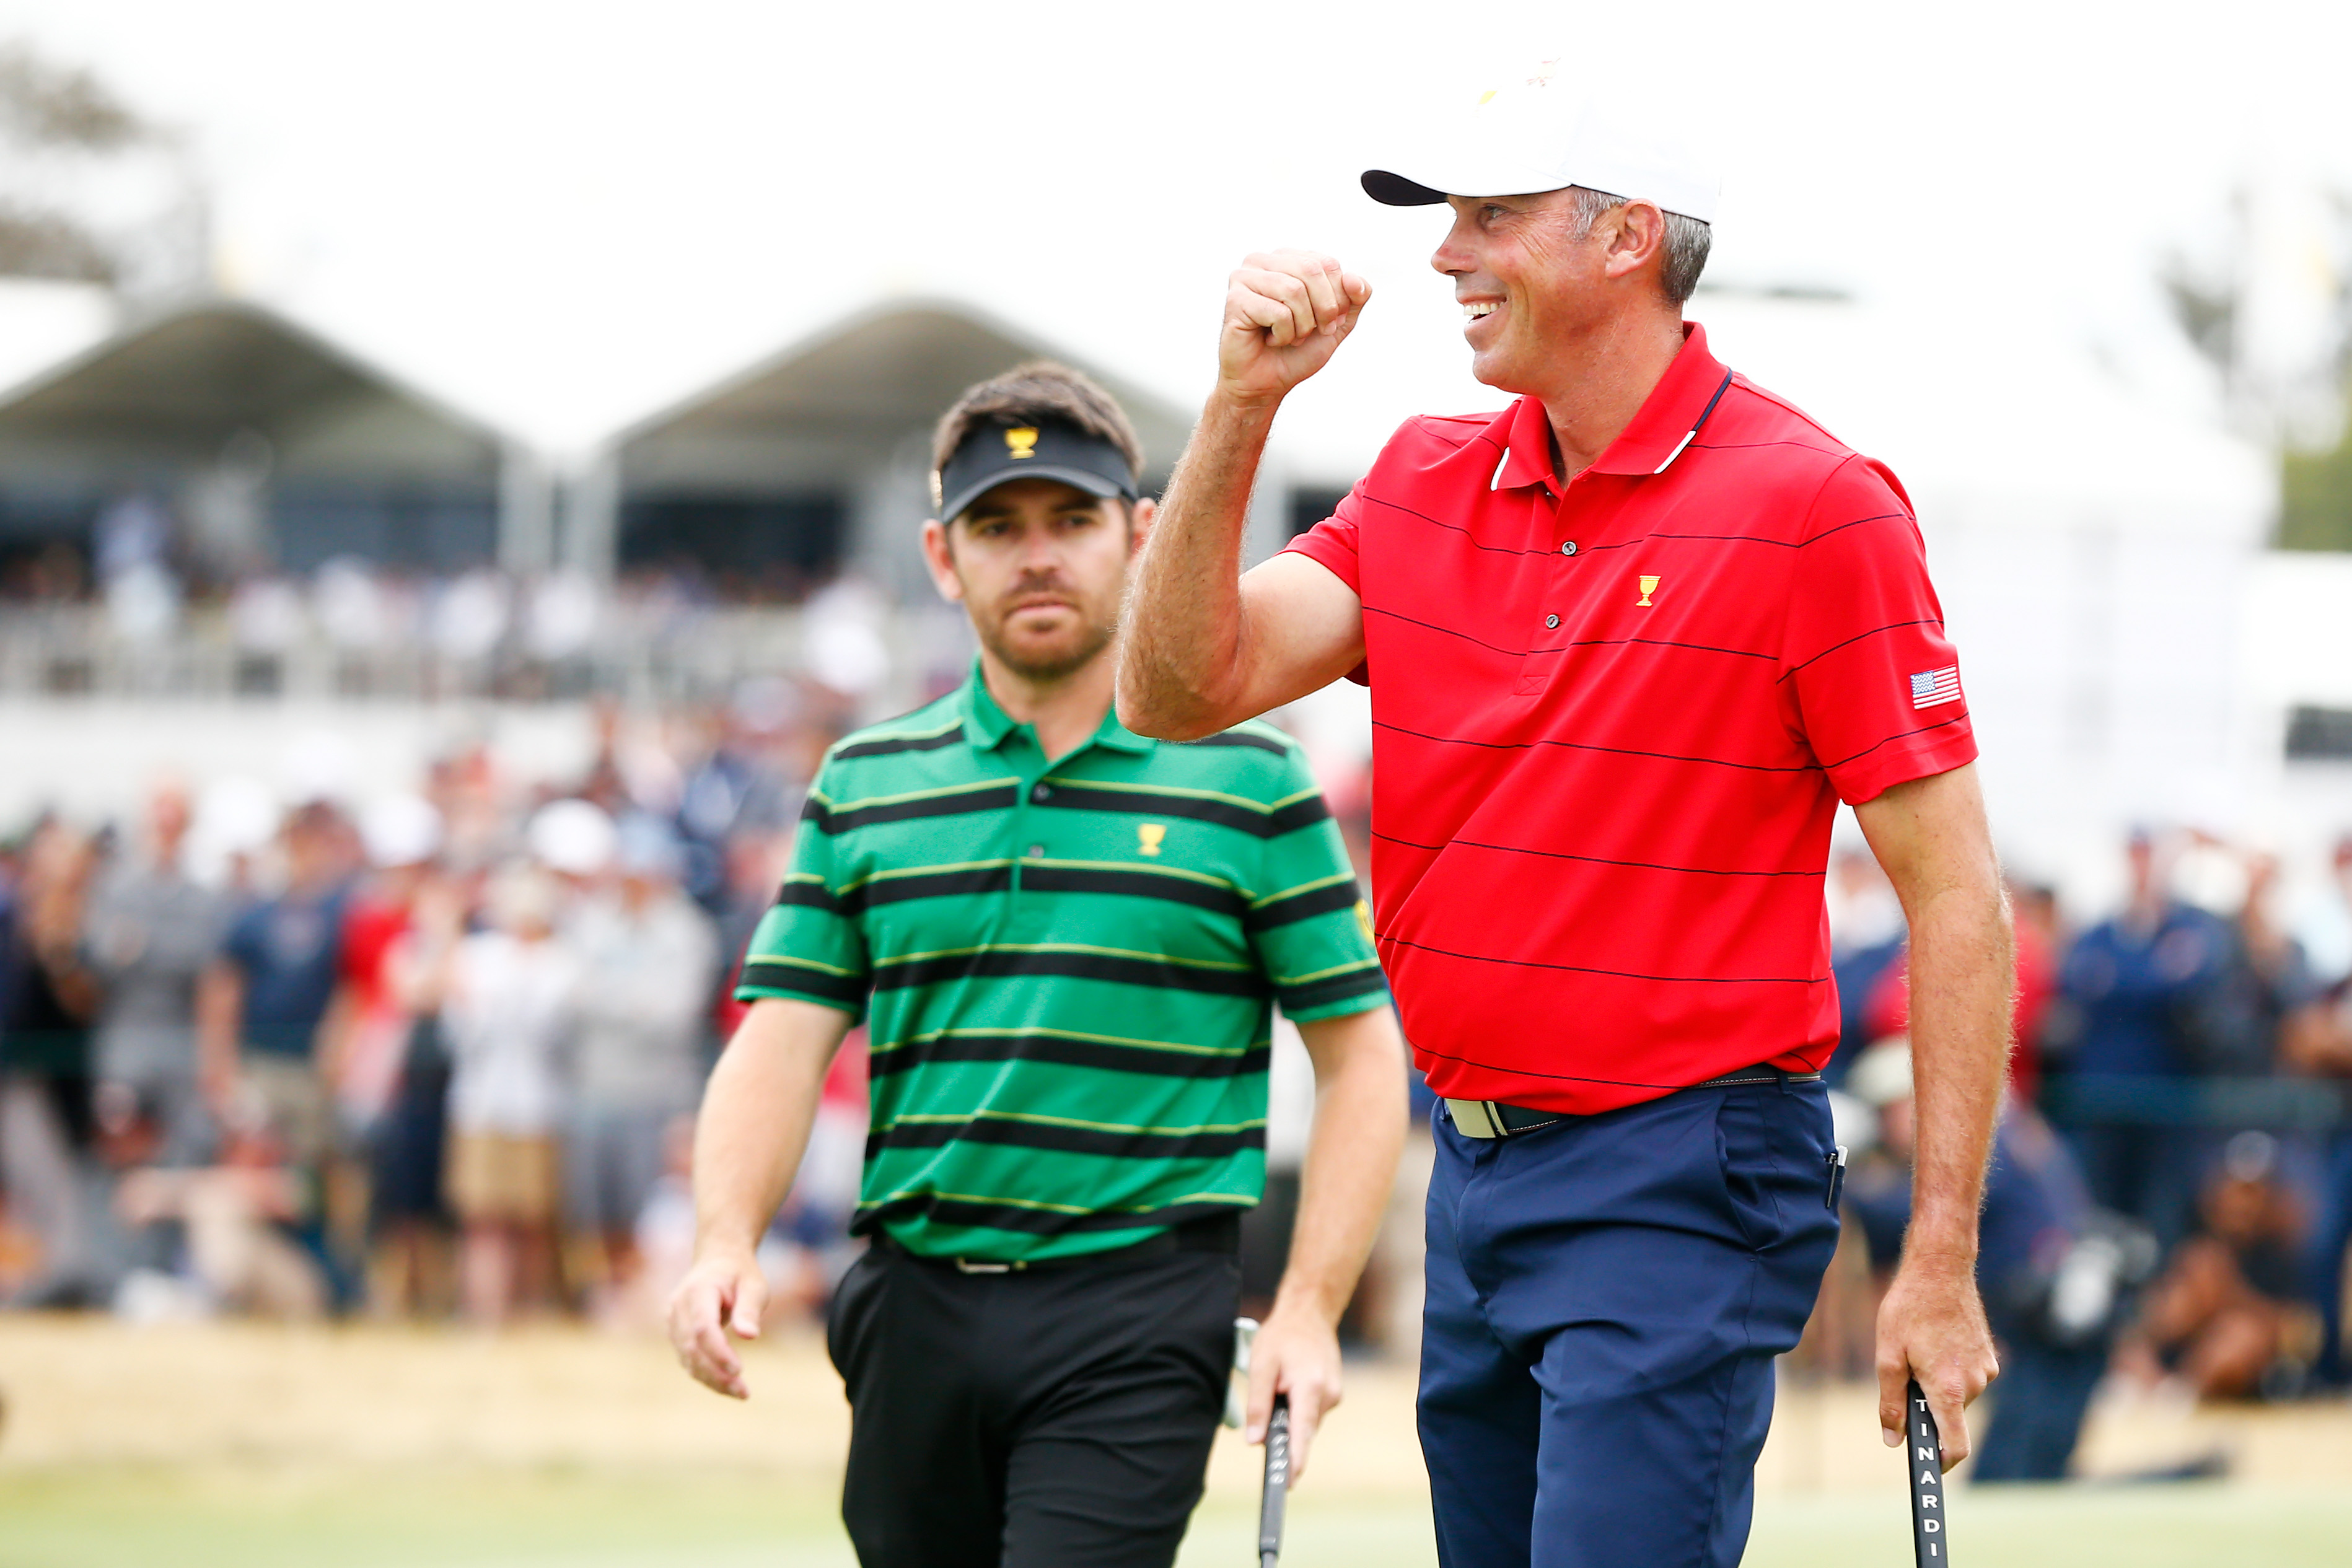 Presidents Cup 2019 live blog Matt Kuchar secures clinching point for the Americans to defeat the Internationals Golf News and Tour Information Golf Digest